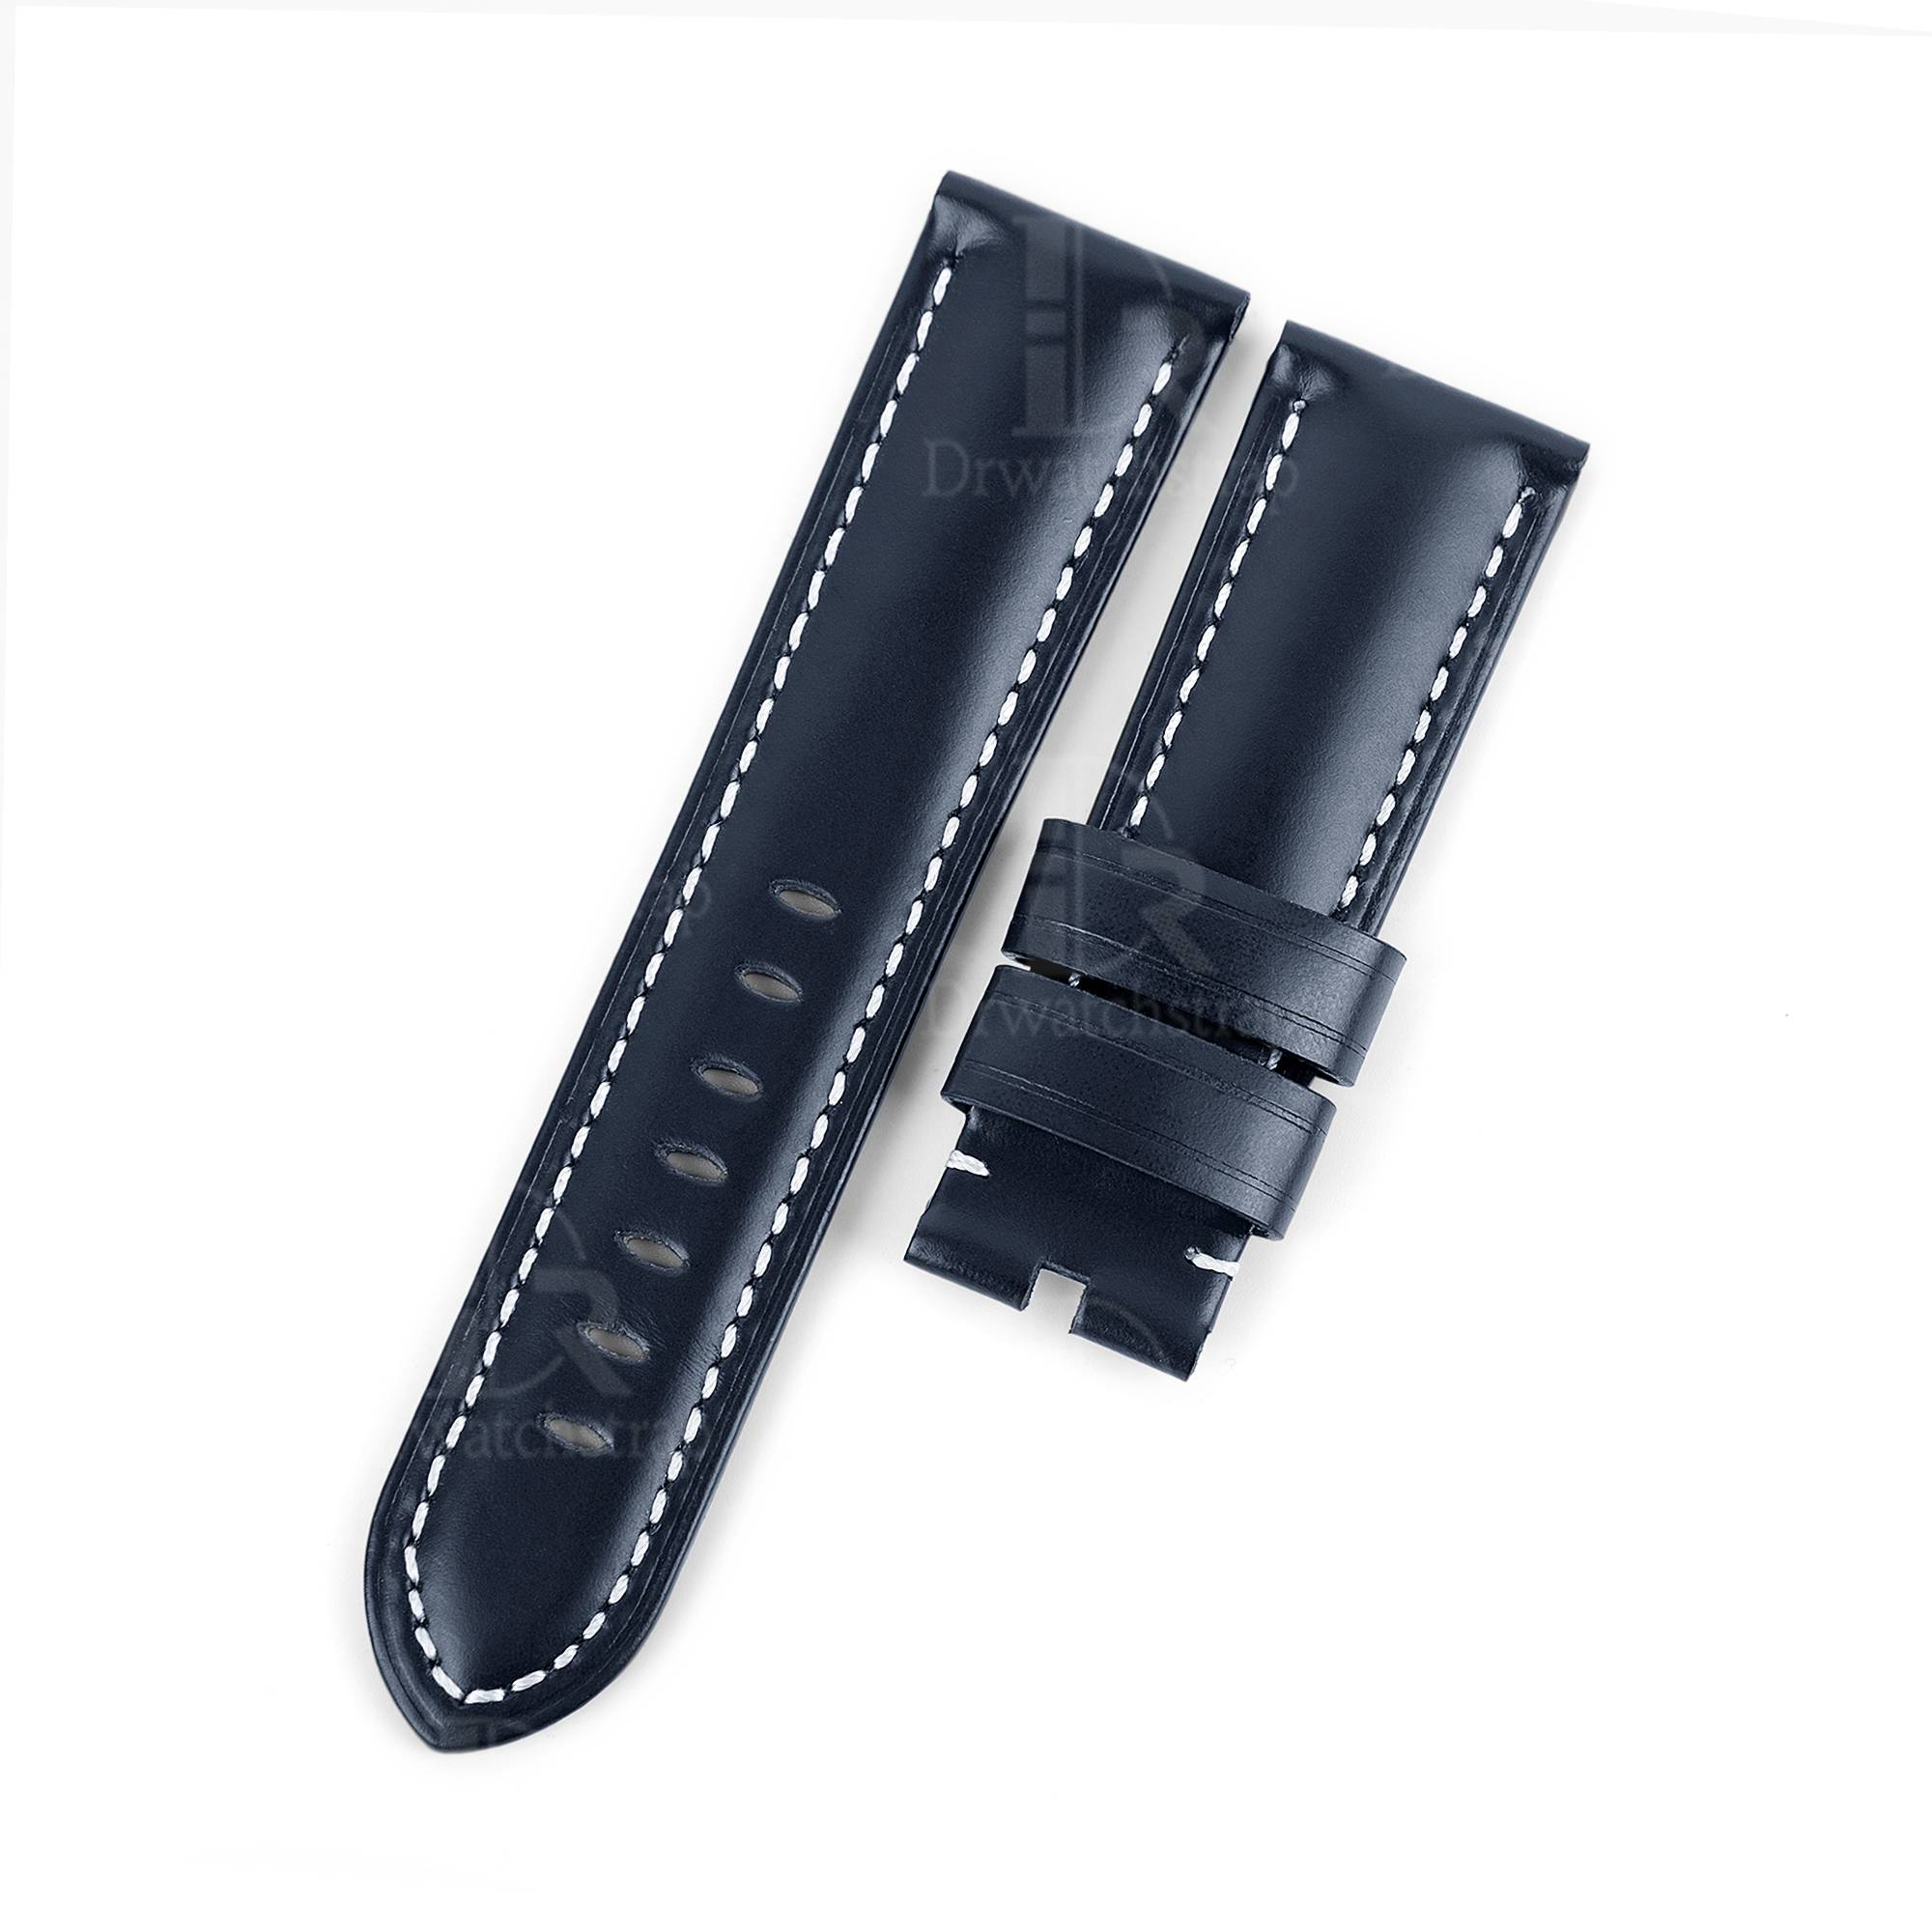 Premium aftermarket best OEM handmade BLue Panerai calfskin leather Strap and watch band replacement 22mm 24mm for Panerai Luminor Due luxury watches from dr watchstrap for sale - Shop the premium calf leather material wholesale straps and watchbands online at a low price